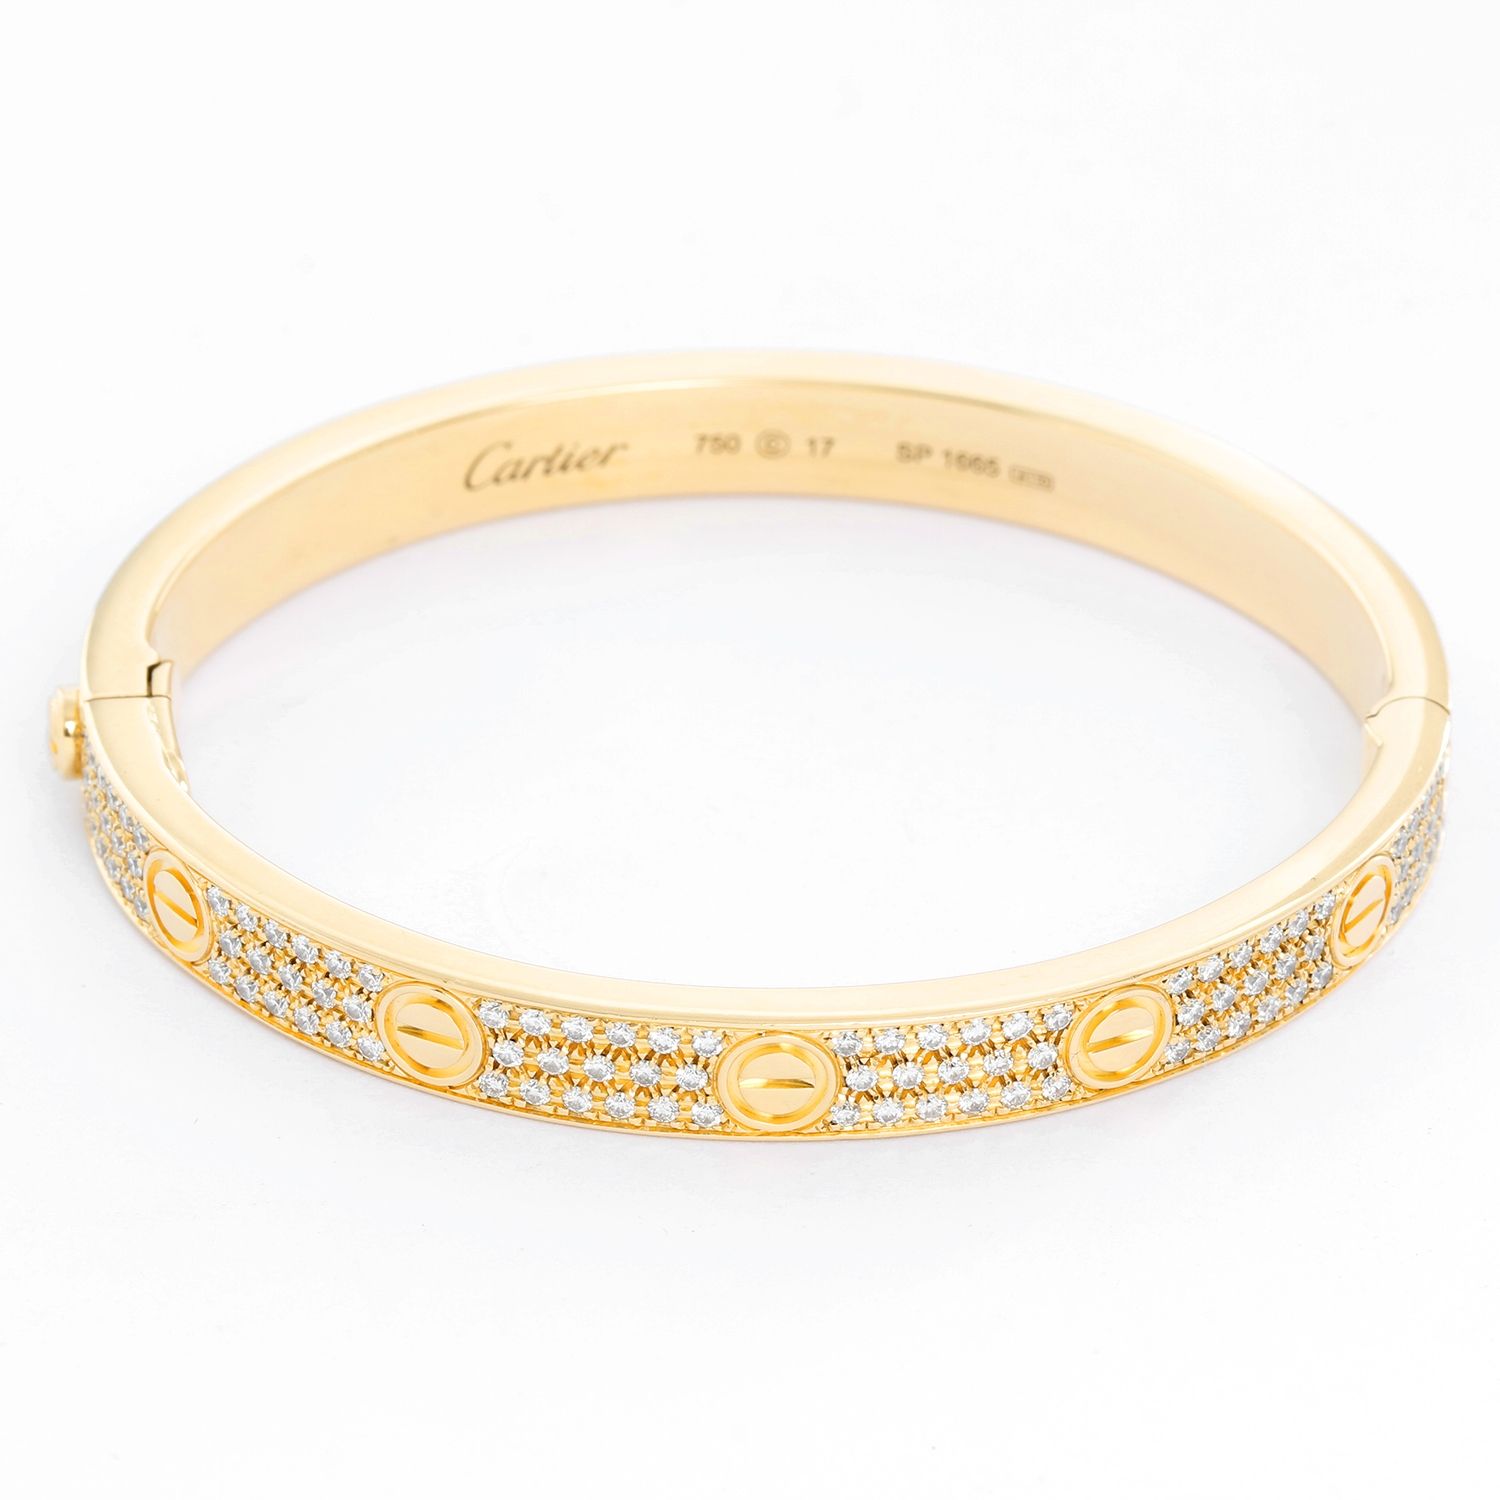 Cartier Love Bracelet 18k Yellow Gold Size 18 With Screwdriver